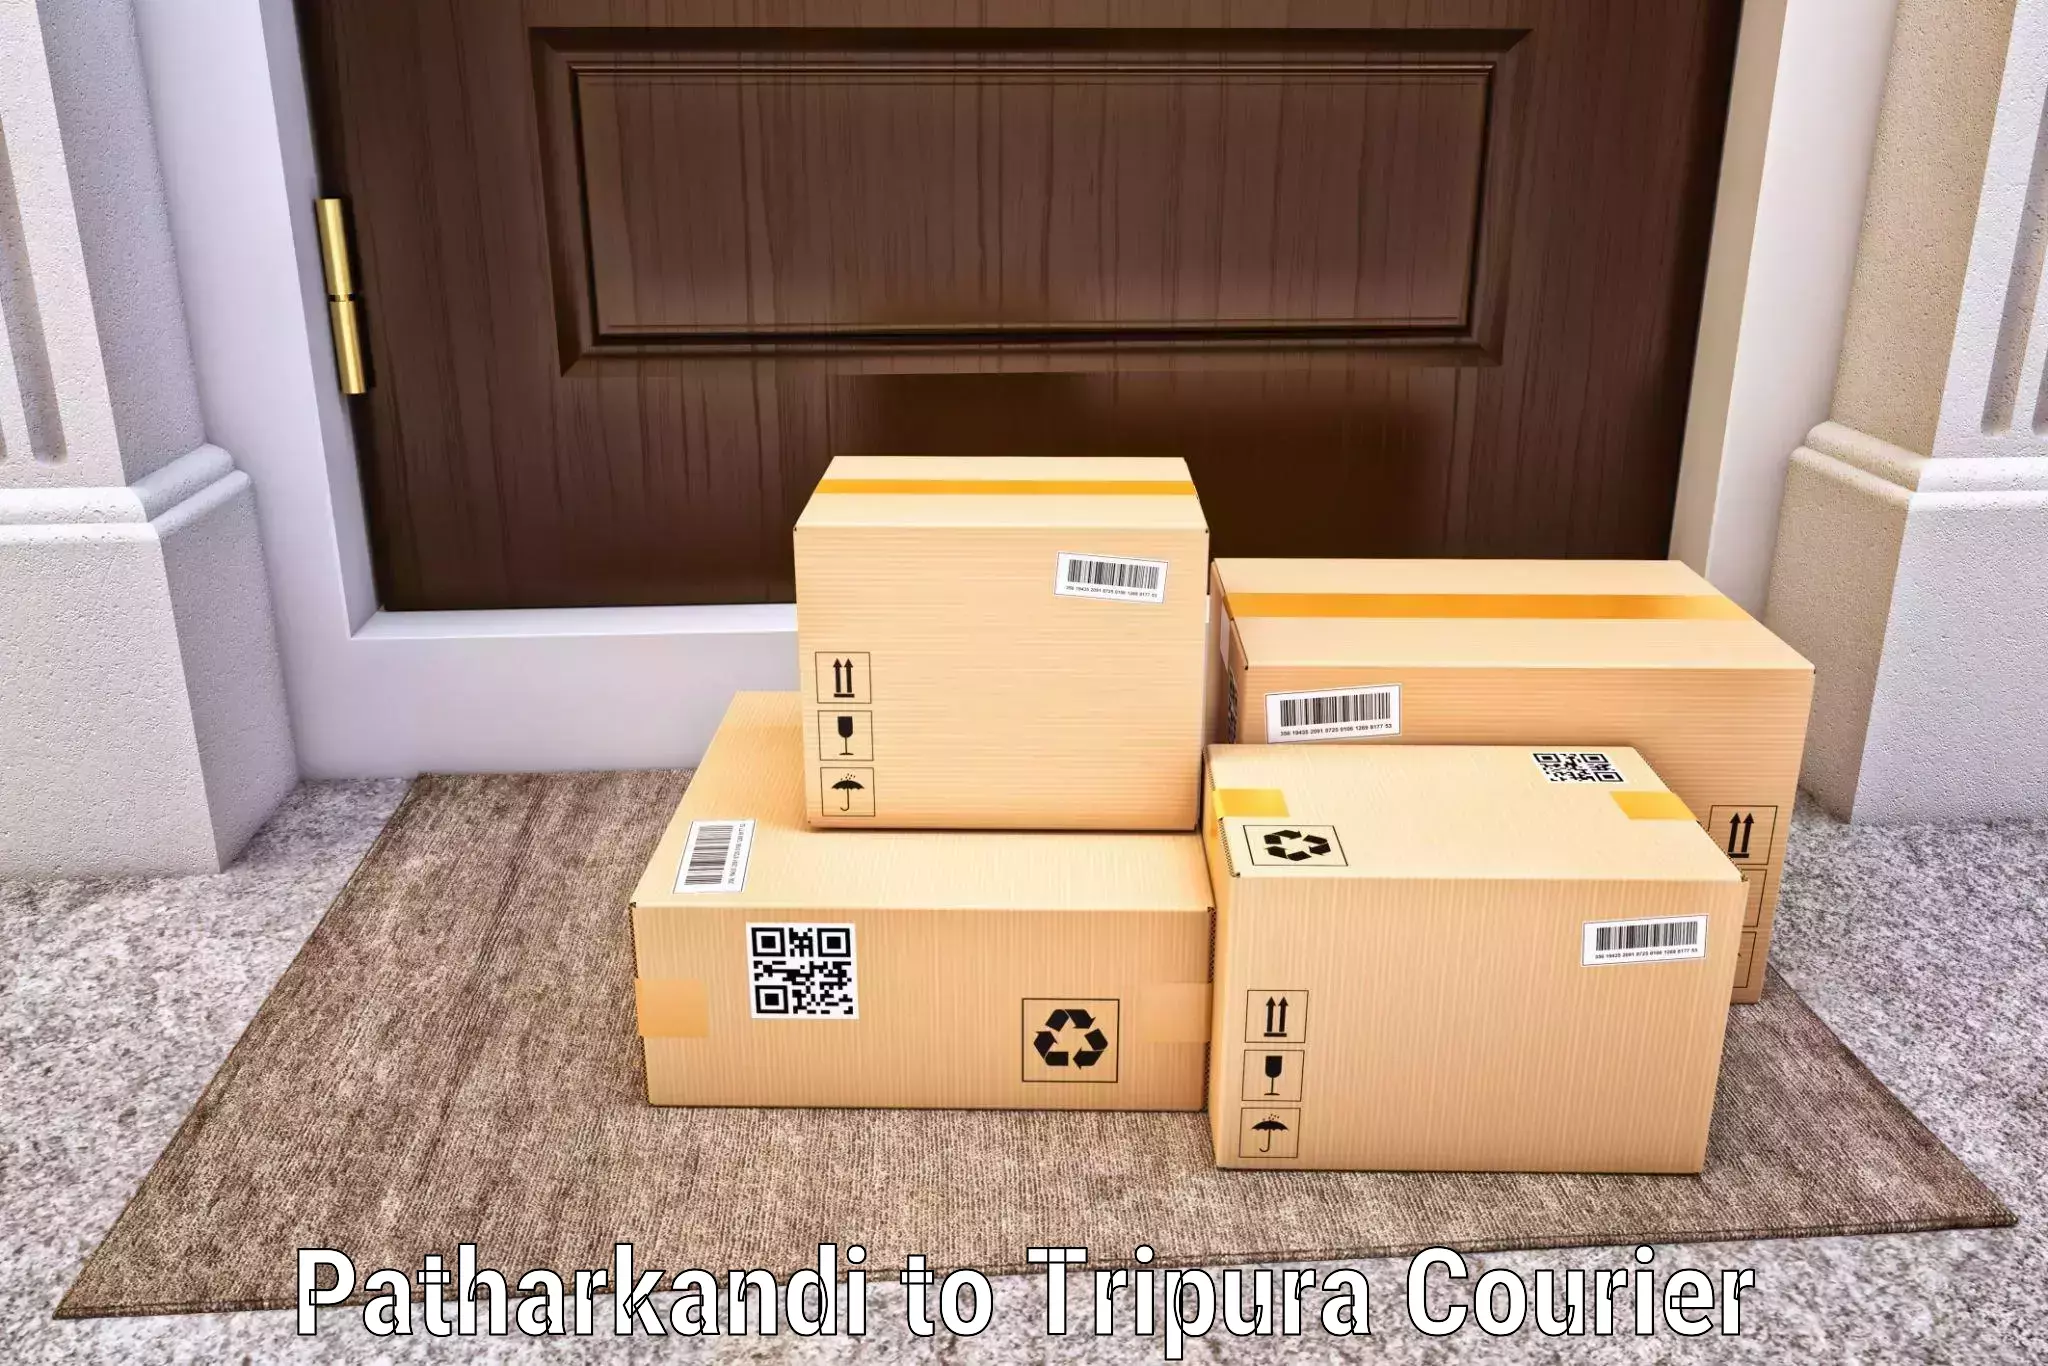 Flexible delivery scheduling Patharkandi to Udaipur Tripura